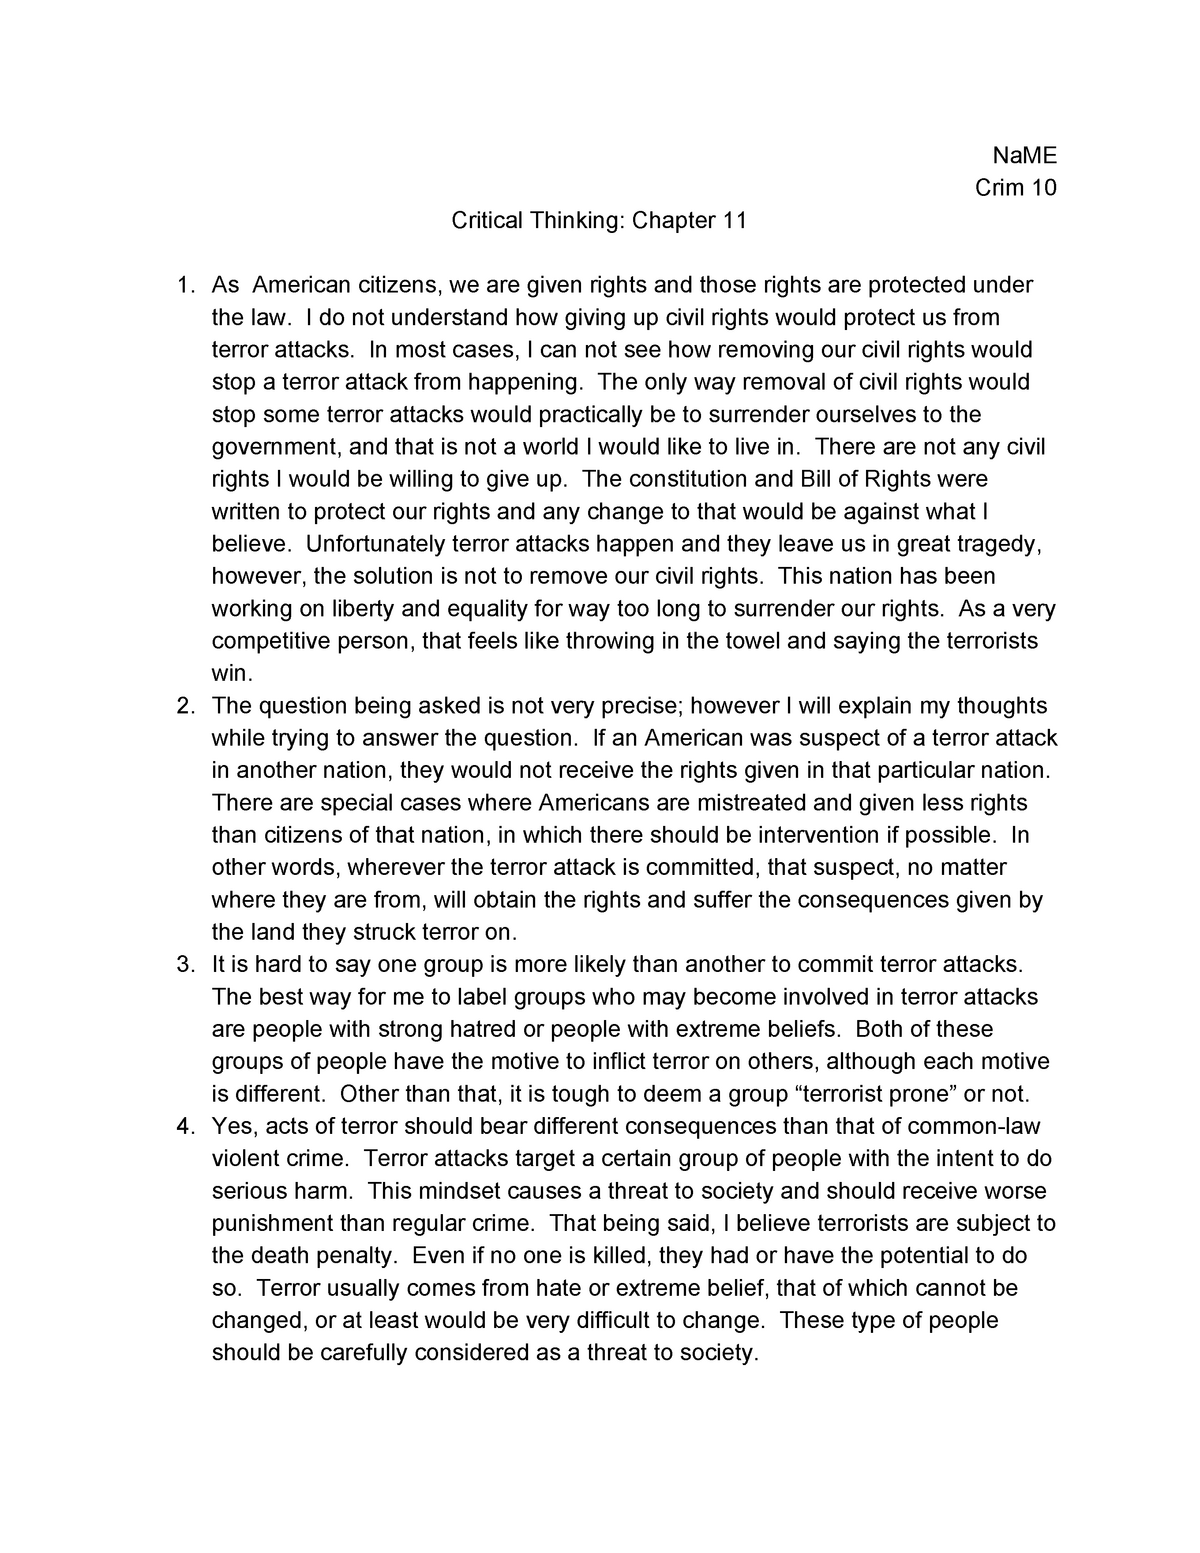 critical thinking chapter 11